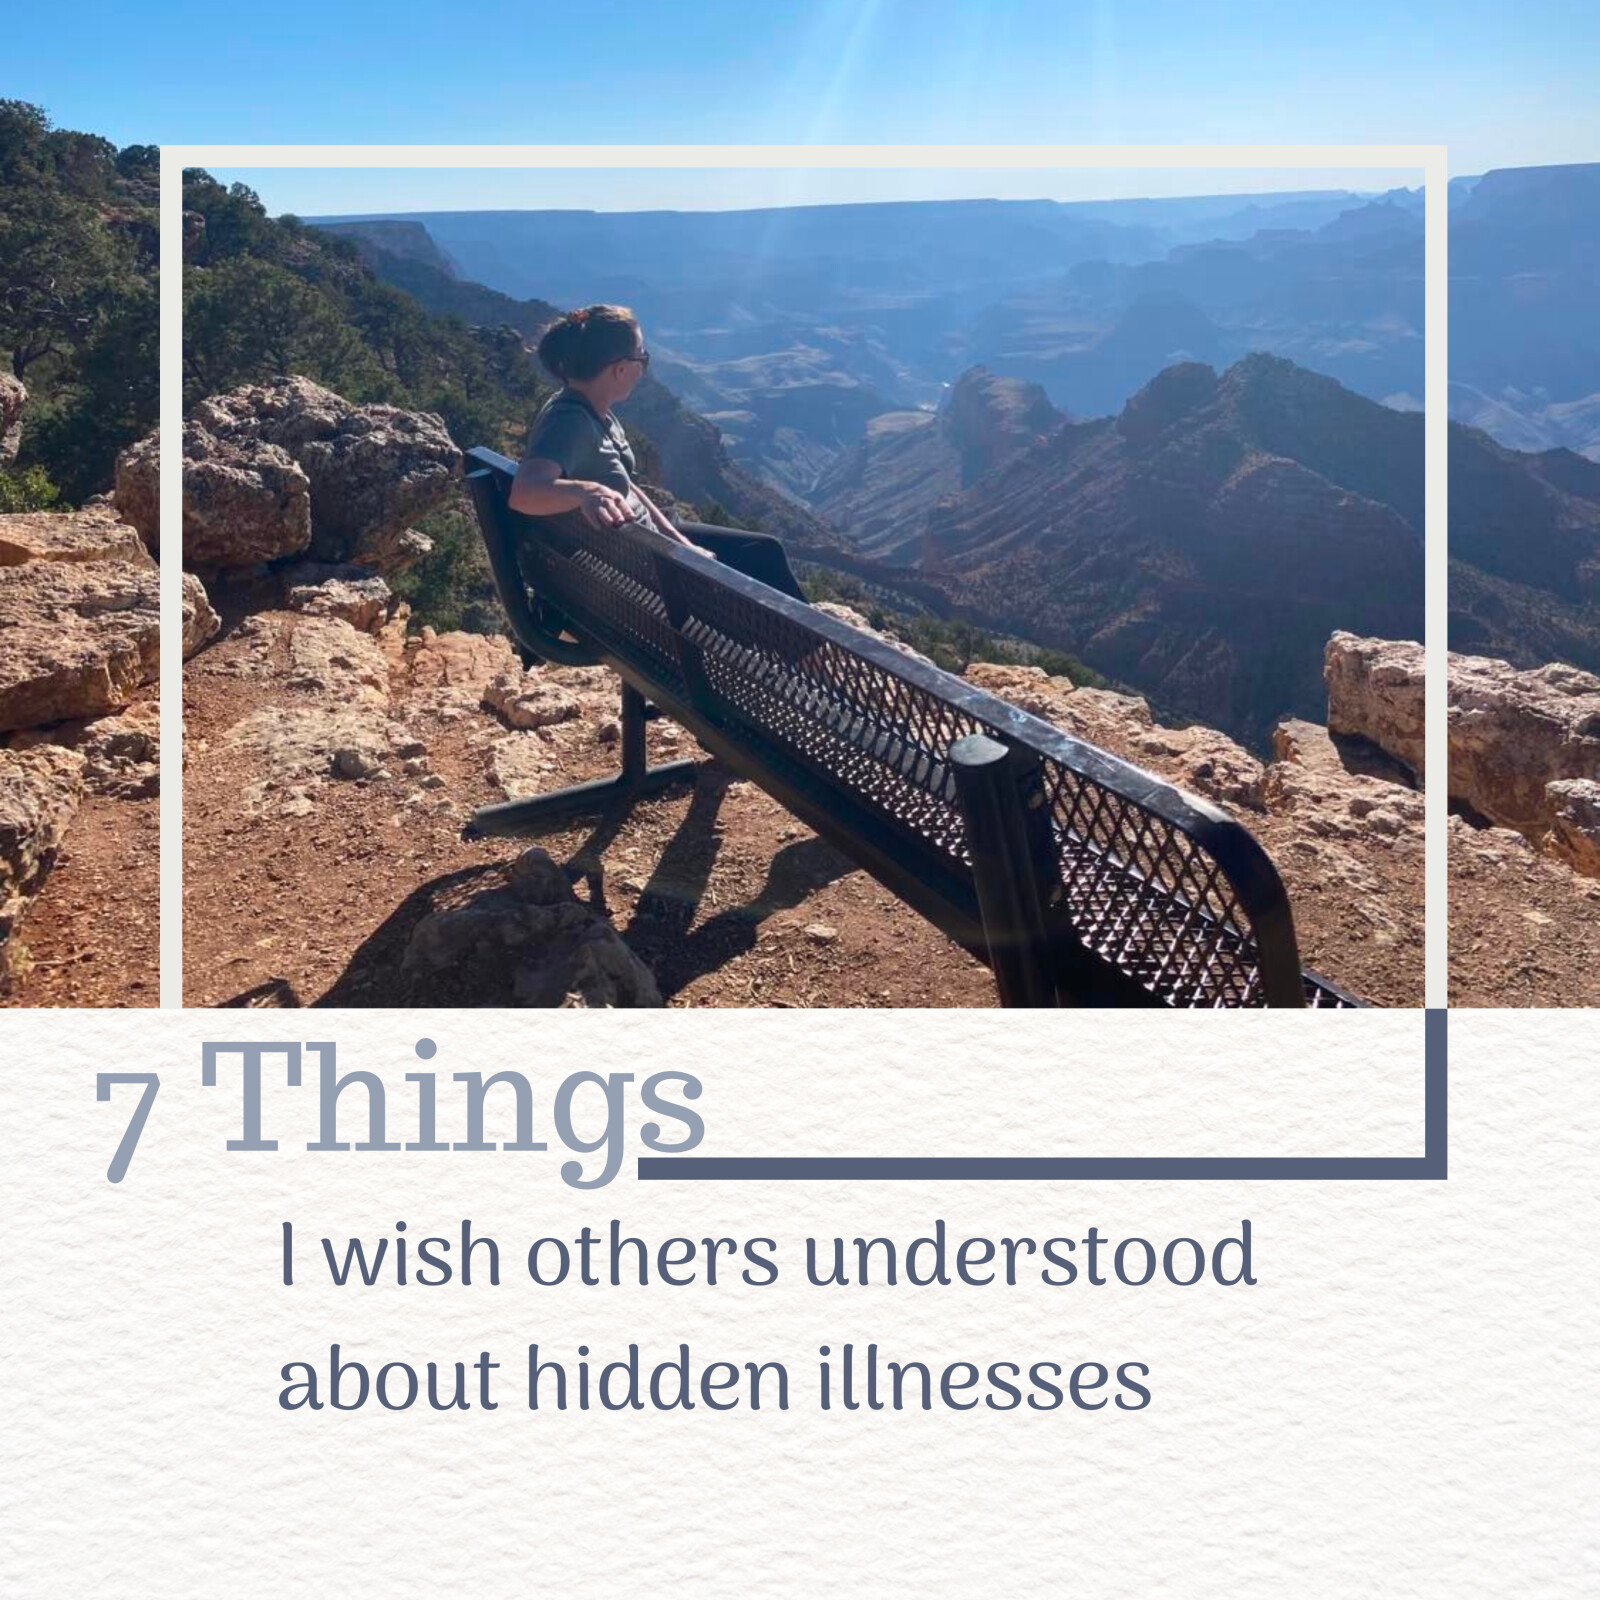 7 Things I Wish Others Understood About Hidden Illnesses